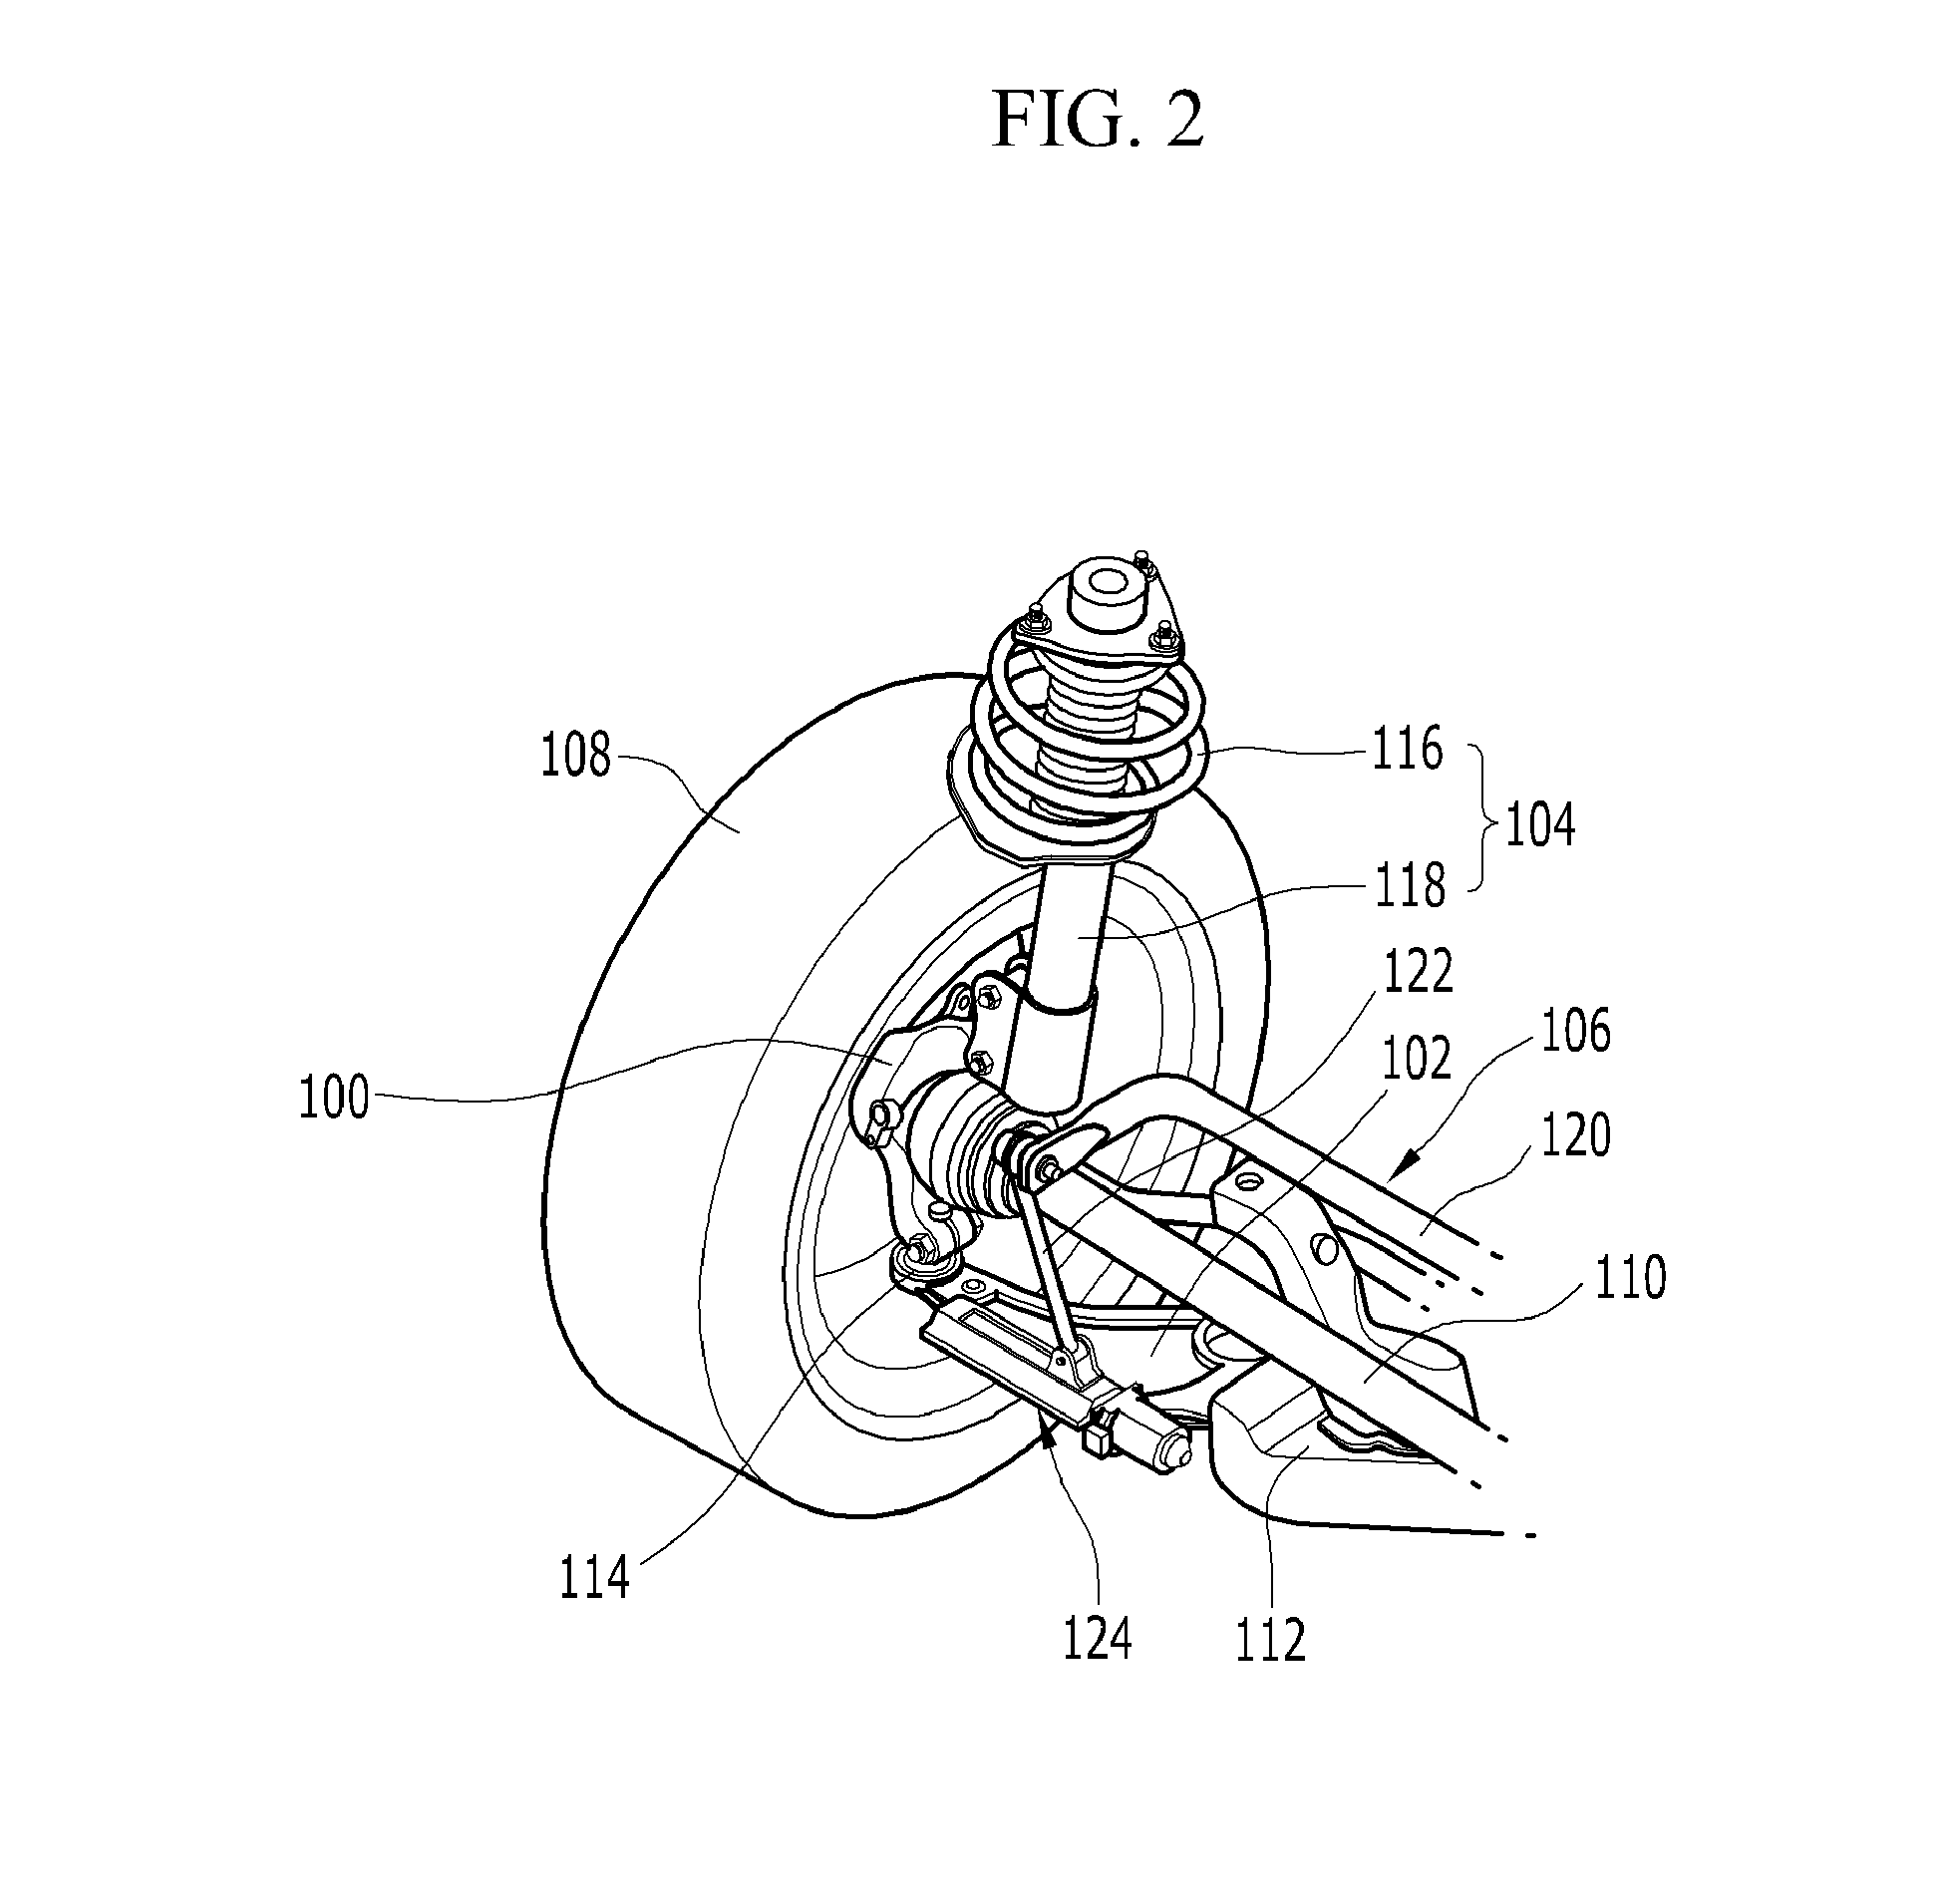 Active Roll Control System for Vehicle